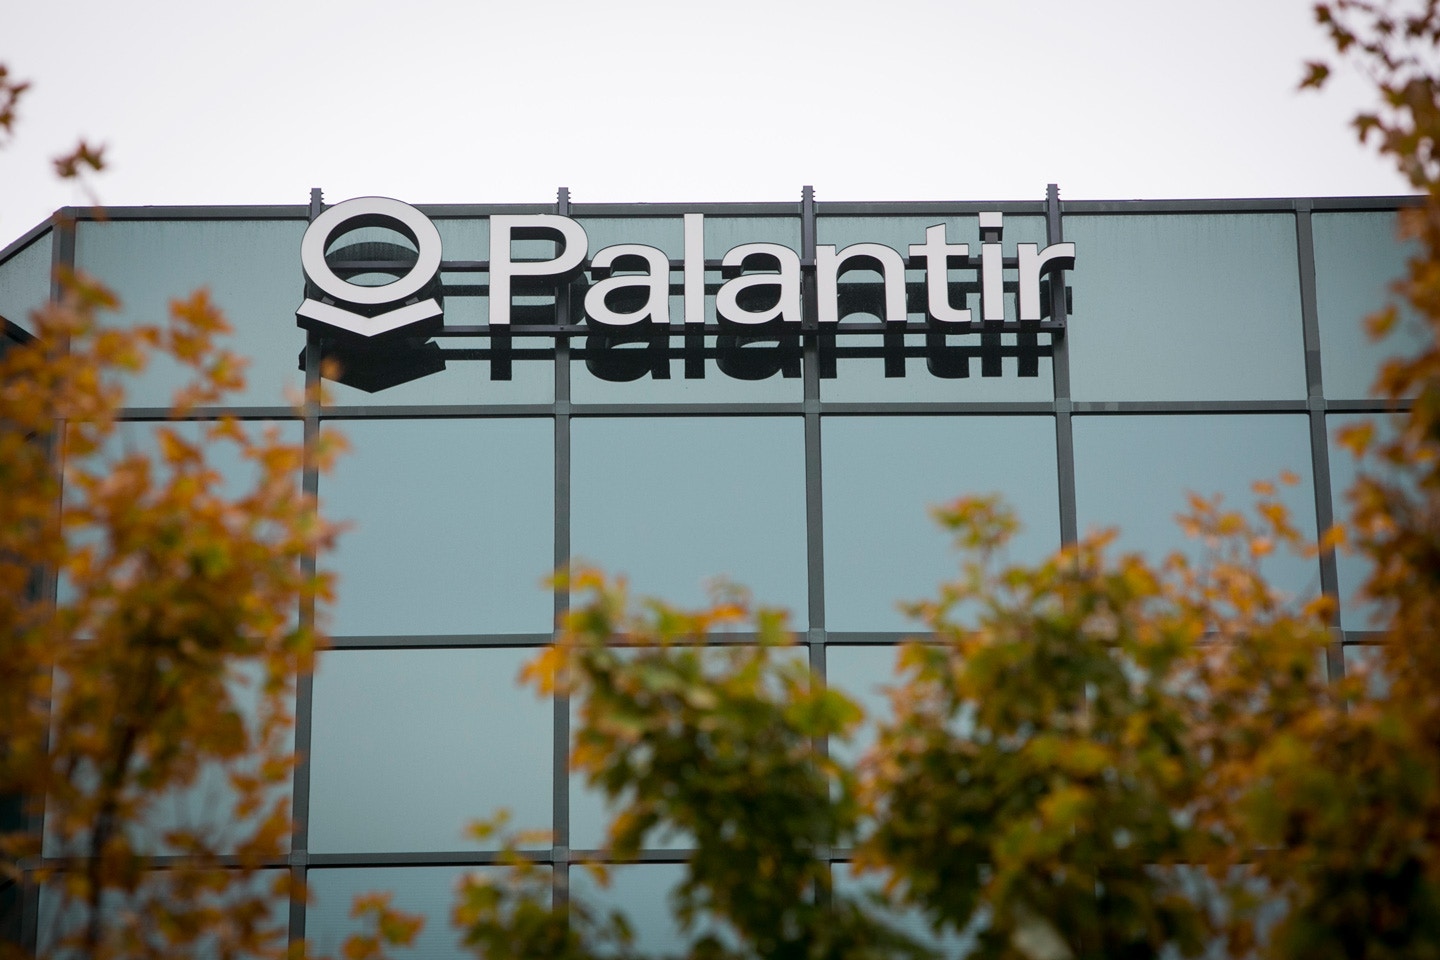 An office building occupied by the technology firm Palantir in McLean, Virginia on October 11, 2014. Photo Credit: Kristoffer Tripplaar/ Sipa USA